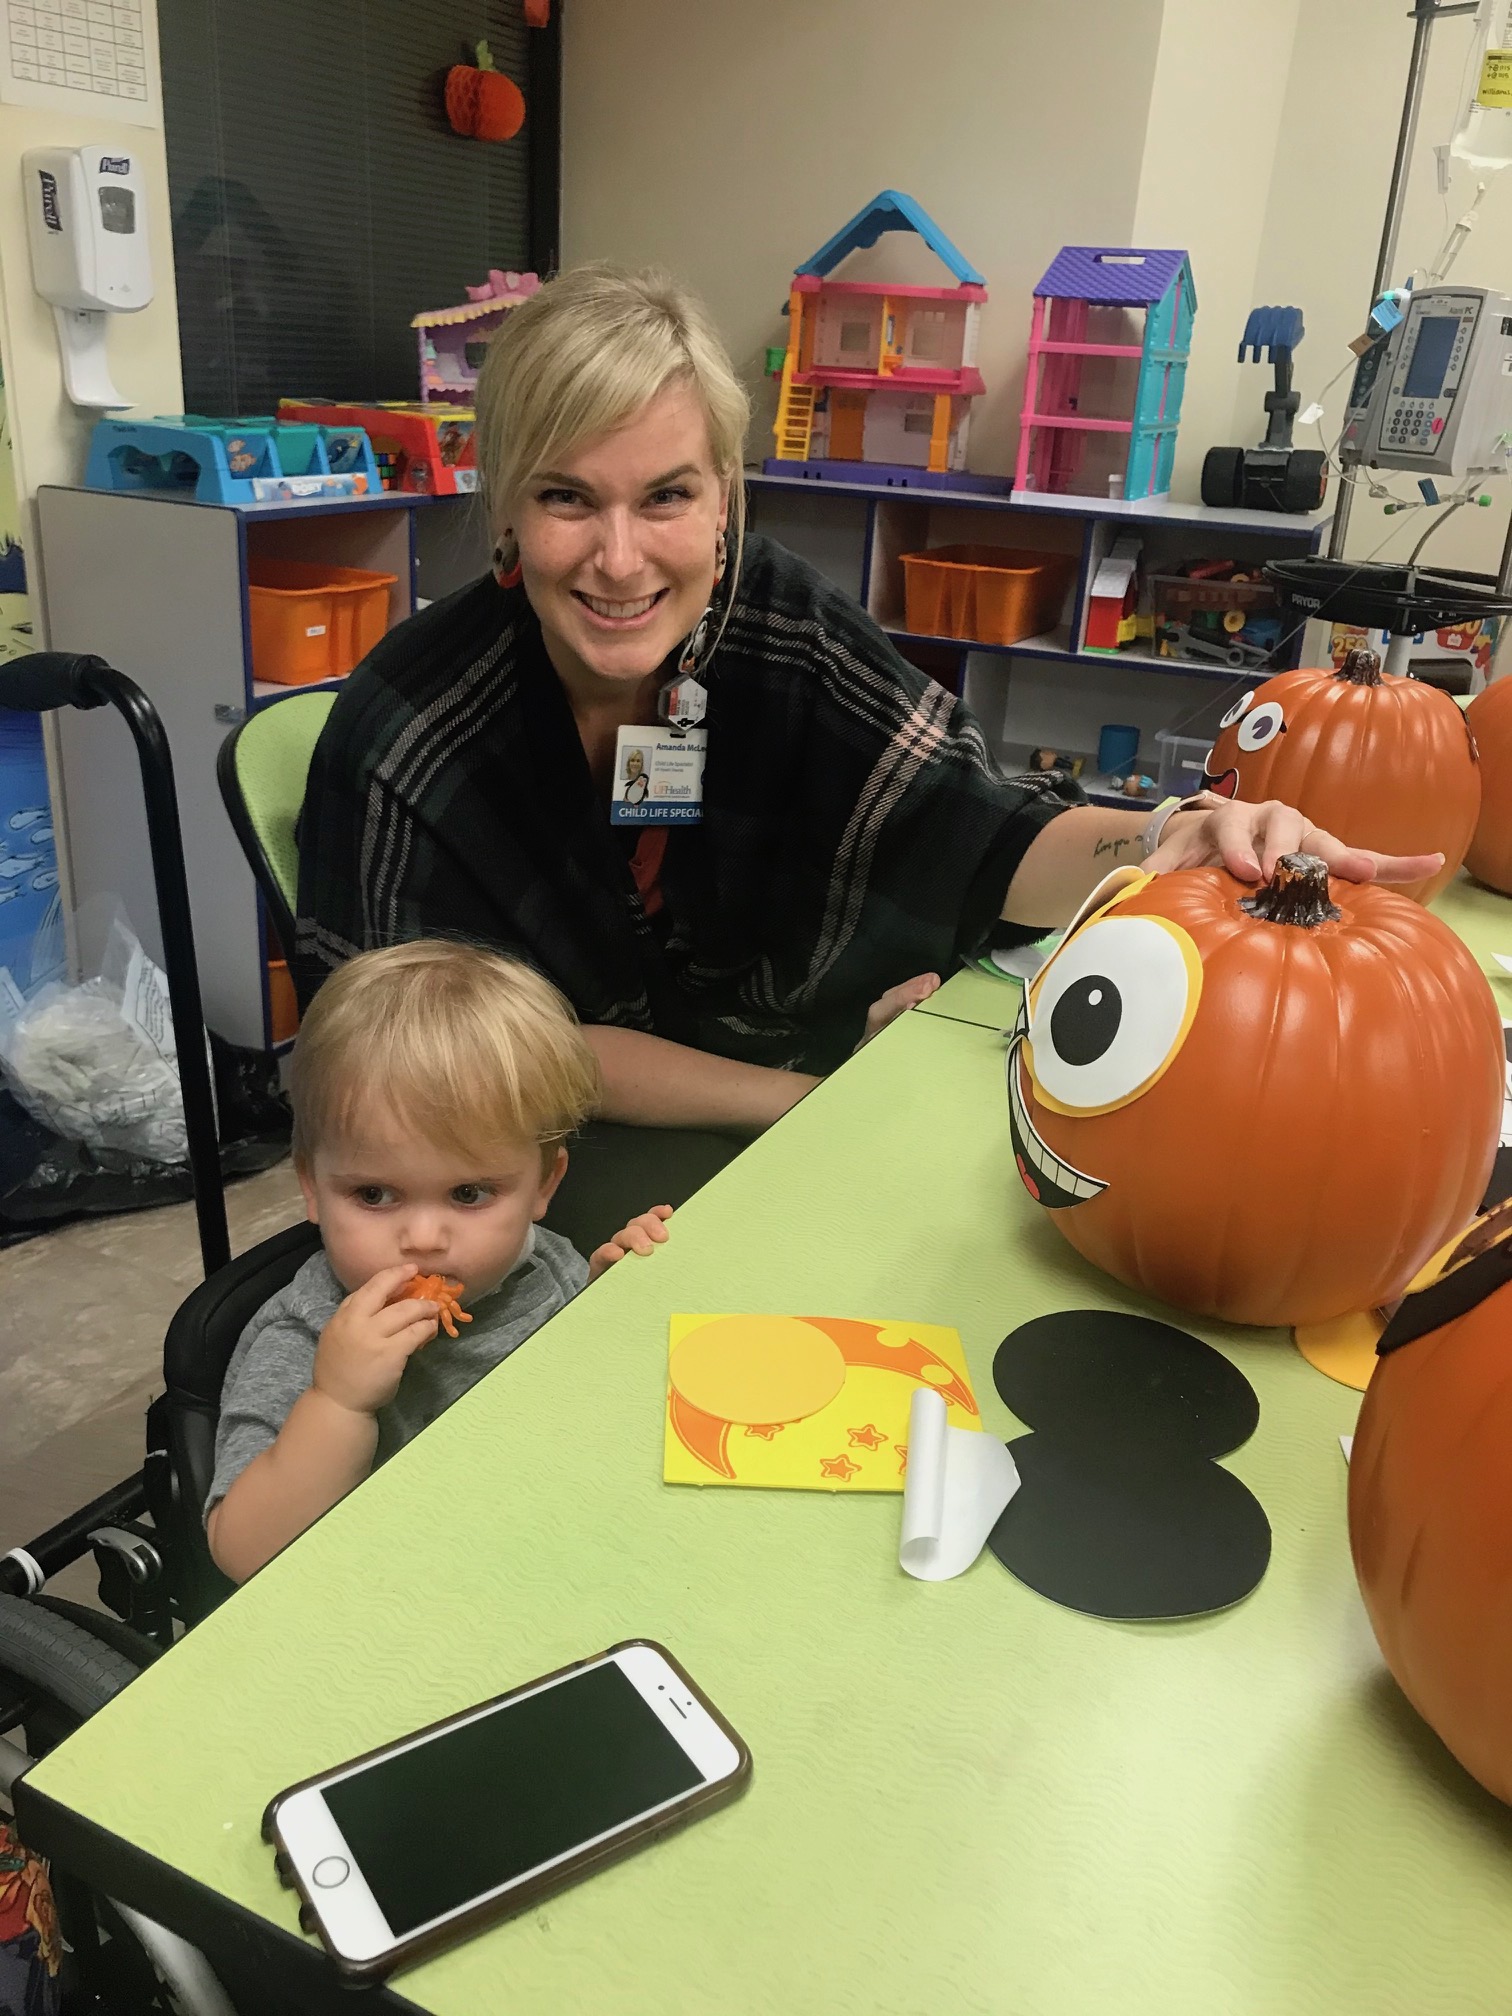 Child life staff member decorating a pumpkin with a pediatric patient